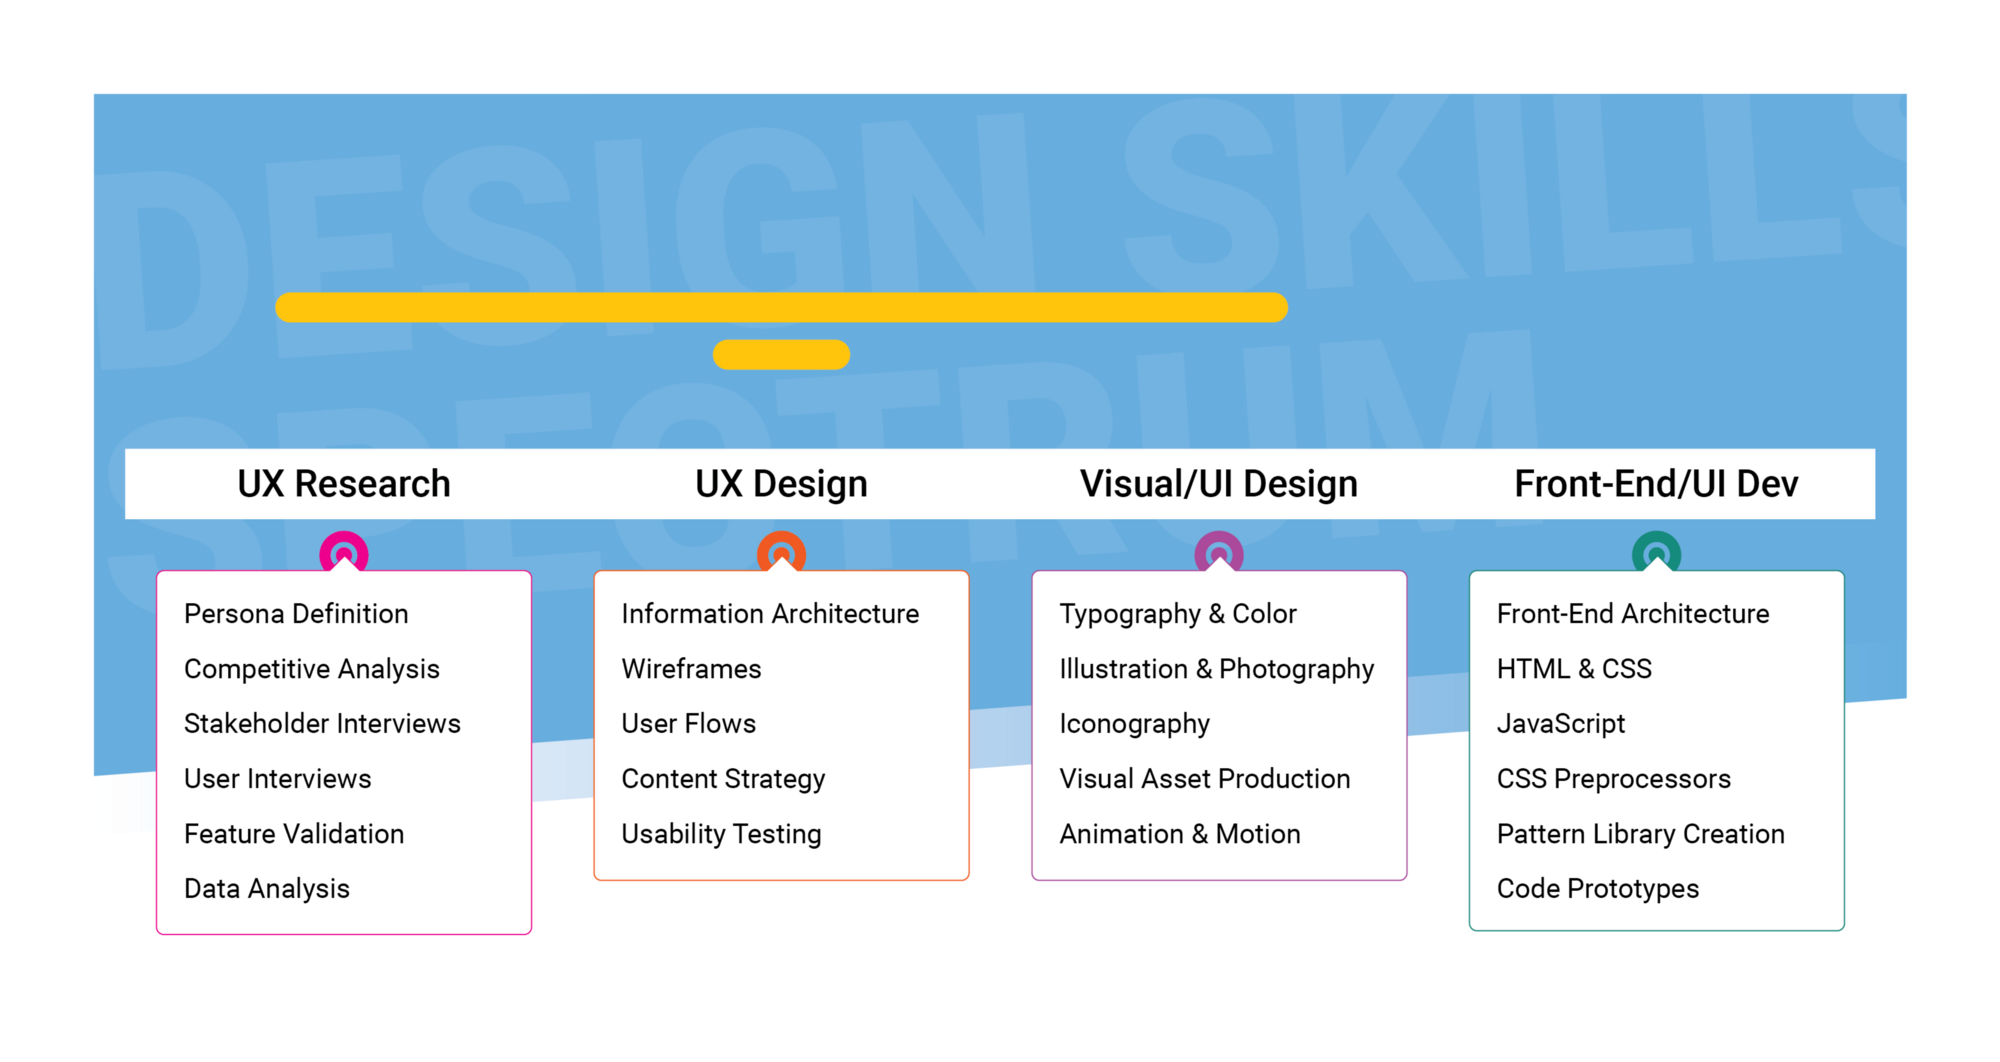 A designer with depth in UX Design and breadth in UX Research and Visual/UI Design